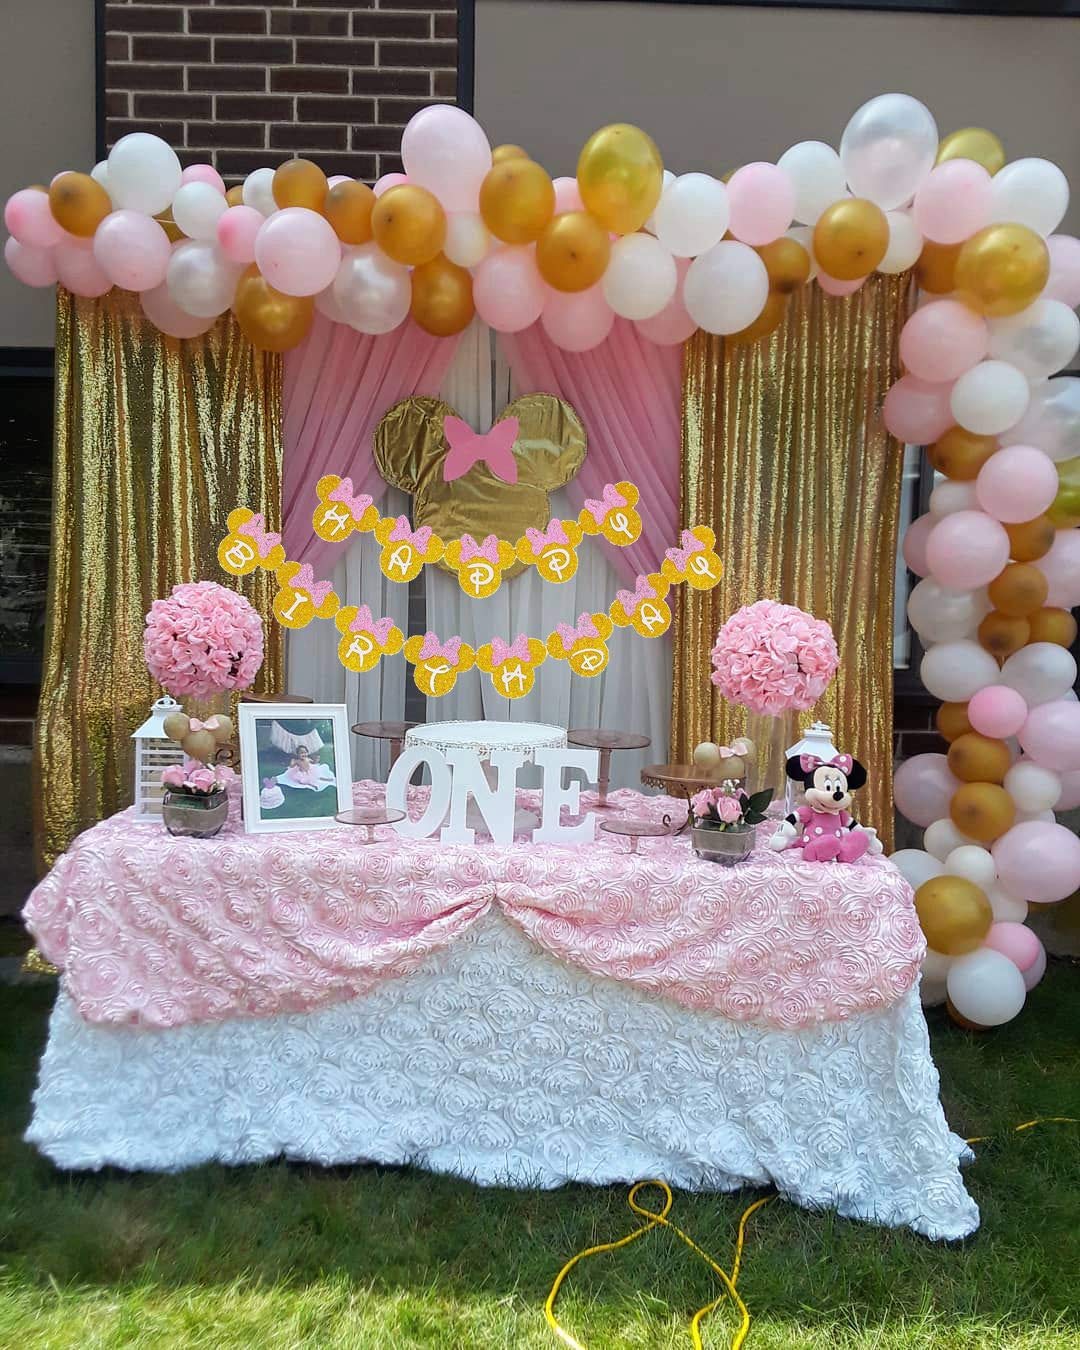 Minnie Mouse Pink And Gold Inspired Happy Birthday Banner, Minnie Birthday Party Decorations for Girls Birthday Themed Party Decoration